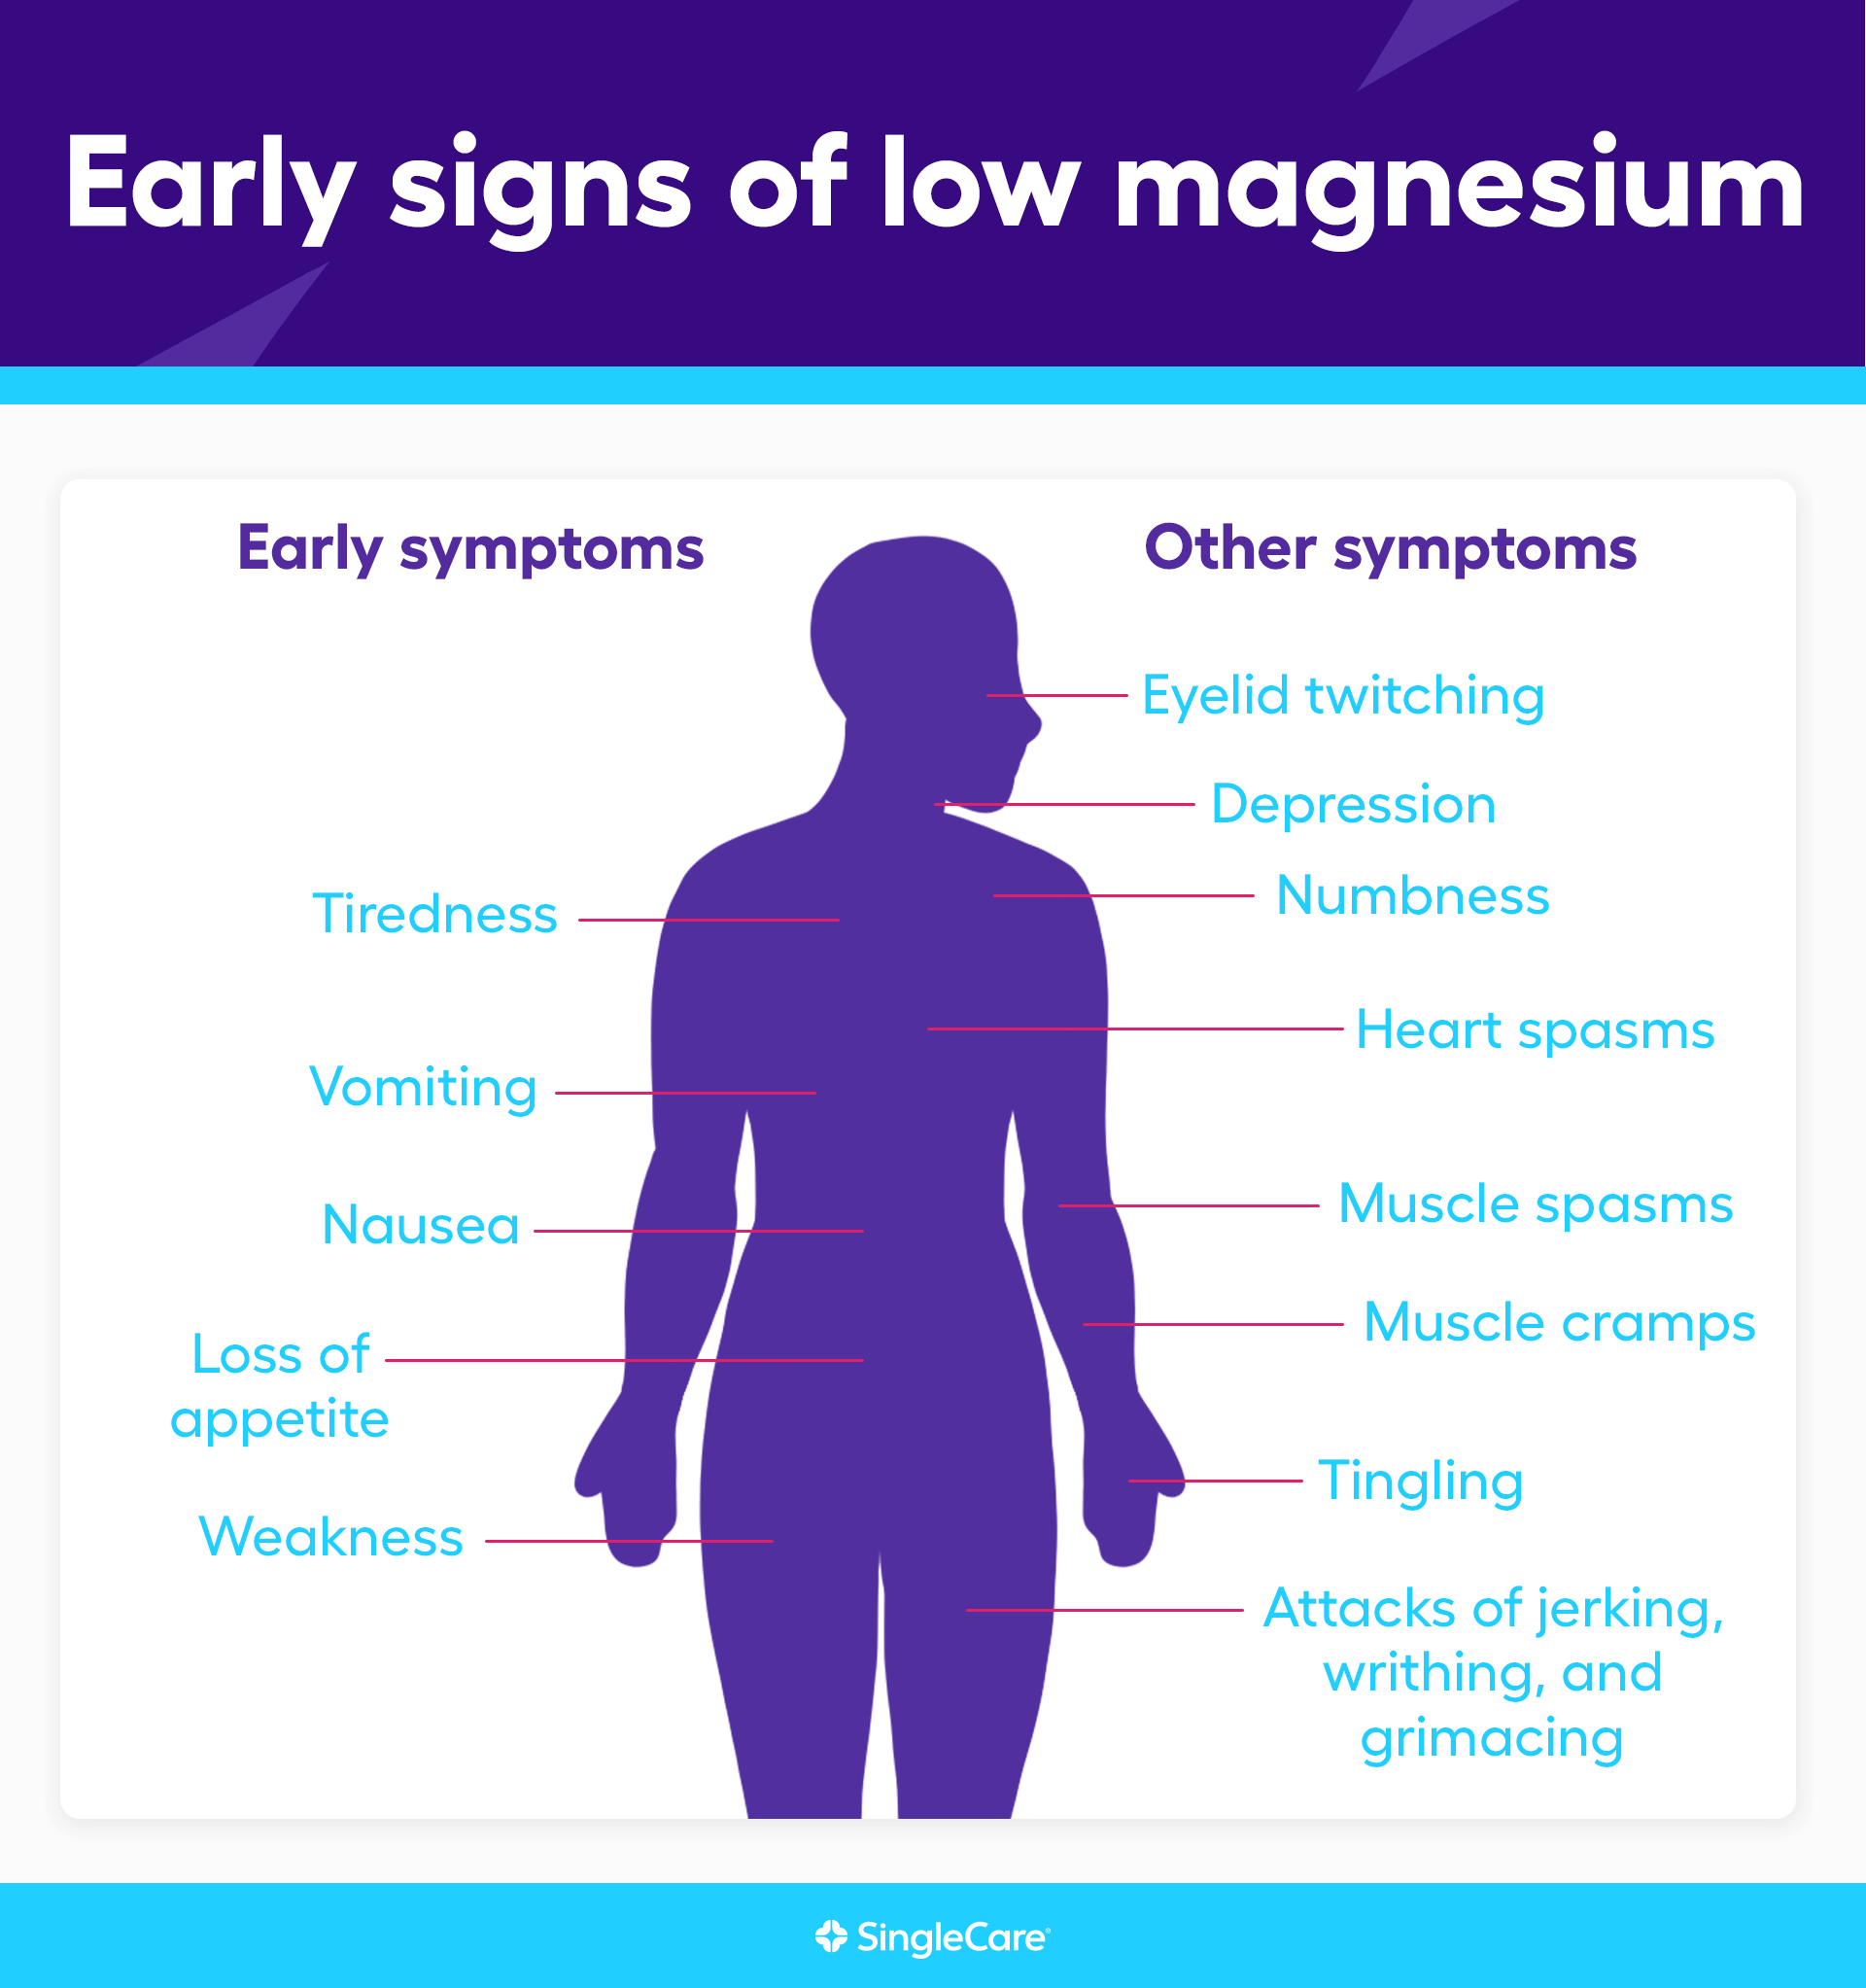 Signs of magnesium deficiency